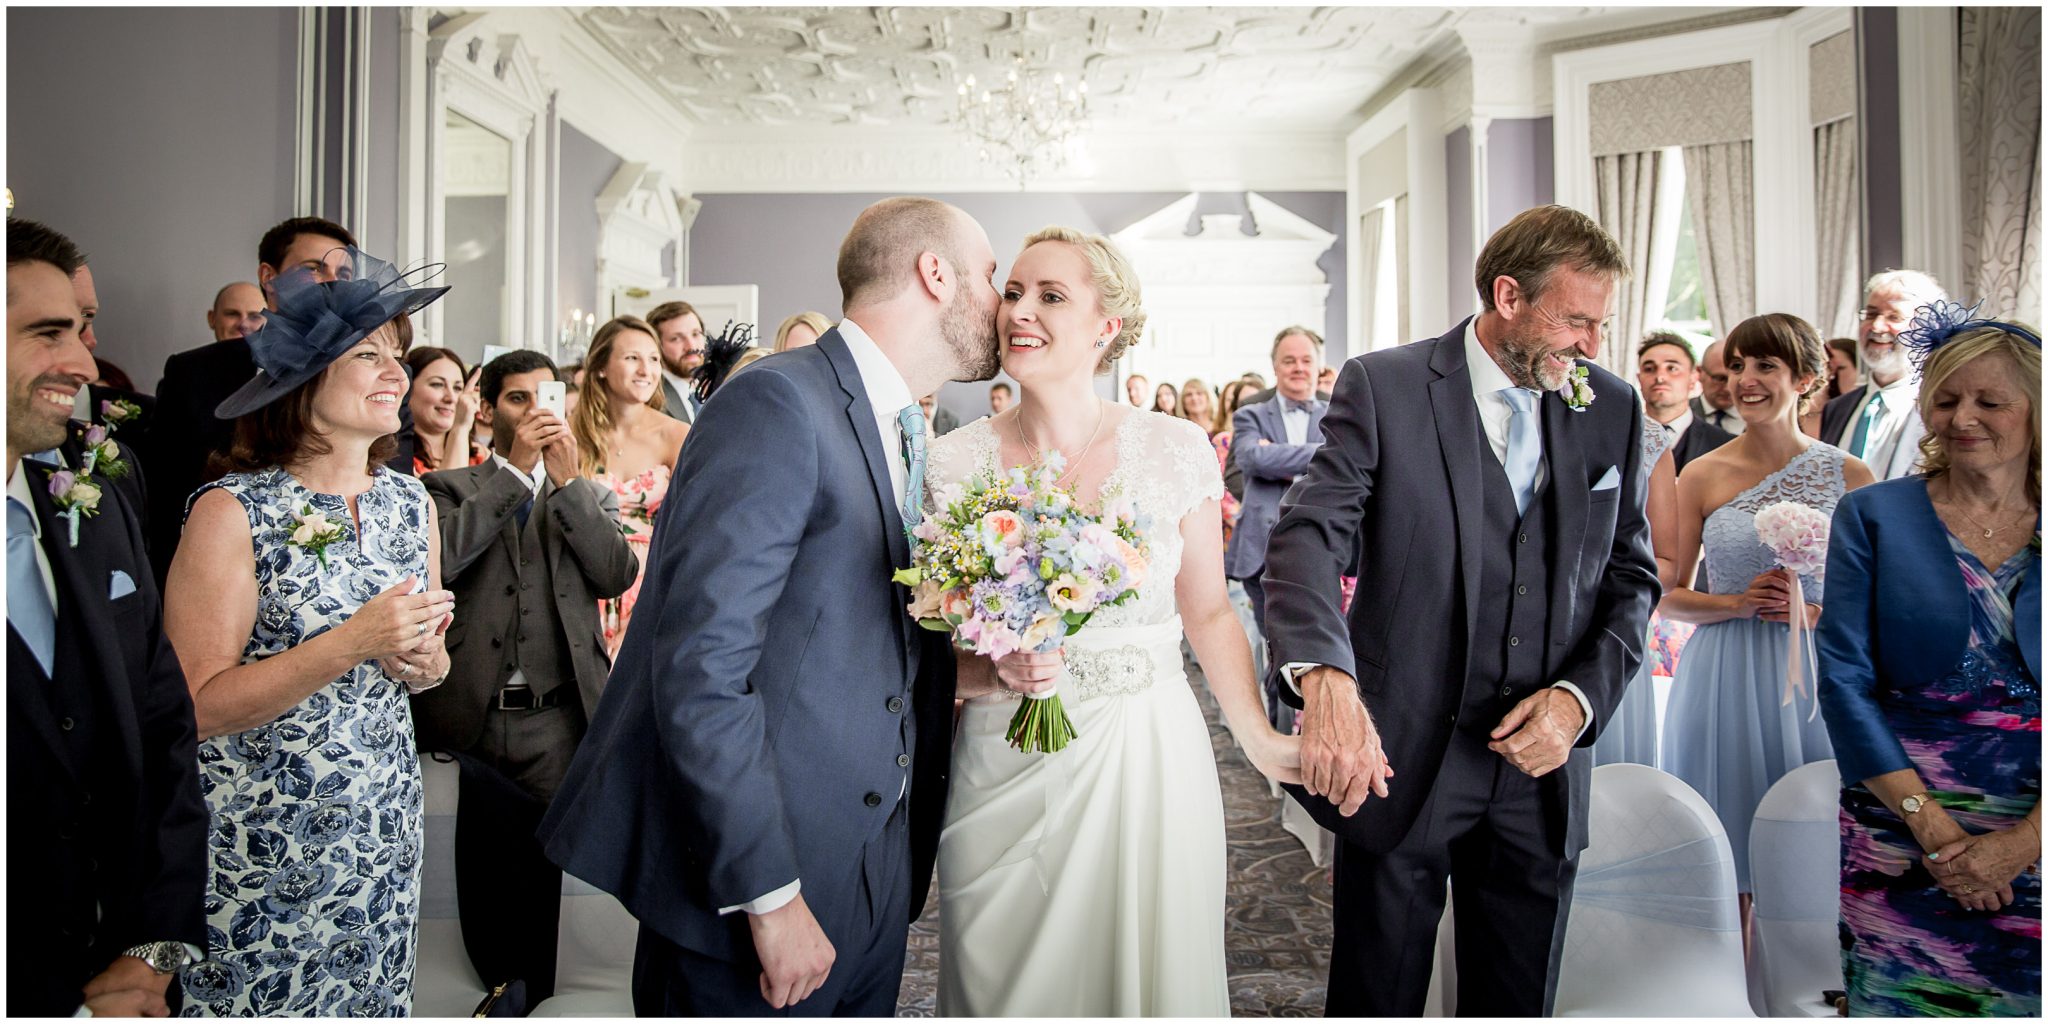 Oakley Hall wedding photography bride and groom kiss at start of marriage ceremony